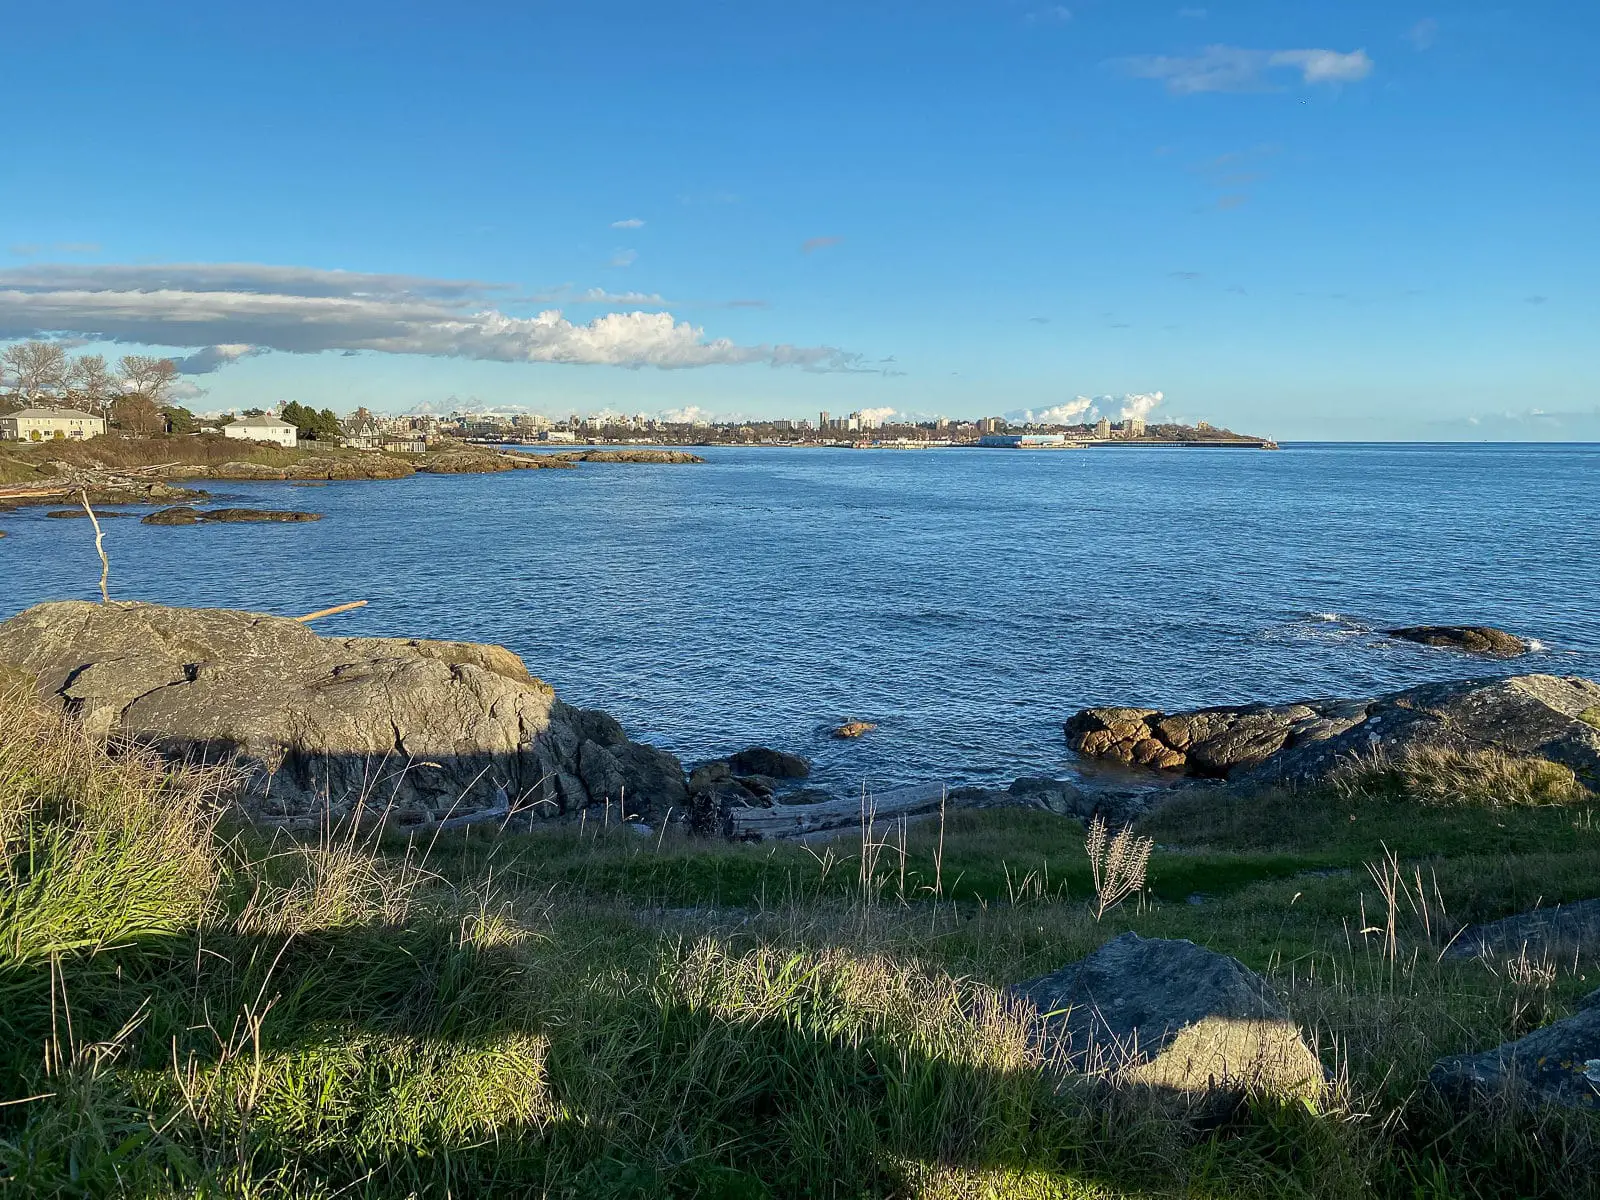 The view of Victoria's coast and downtown area from Macaulay Point Park